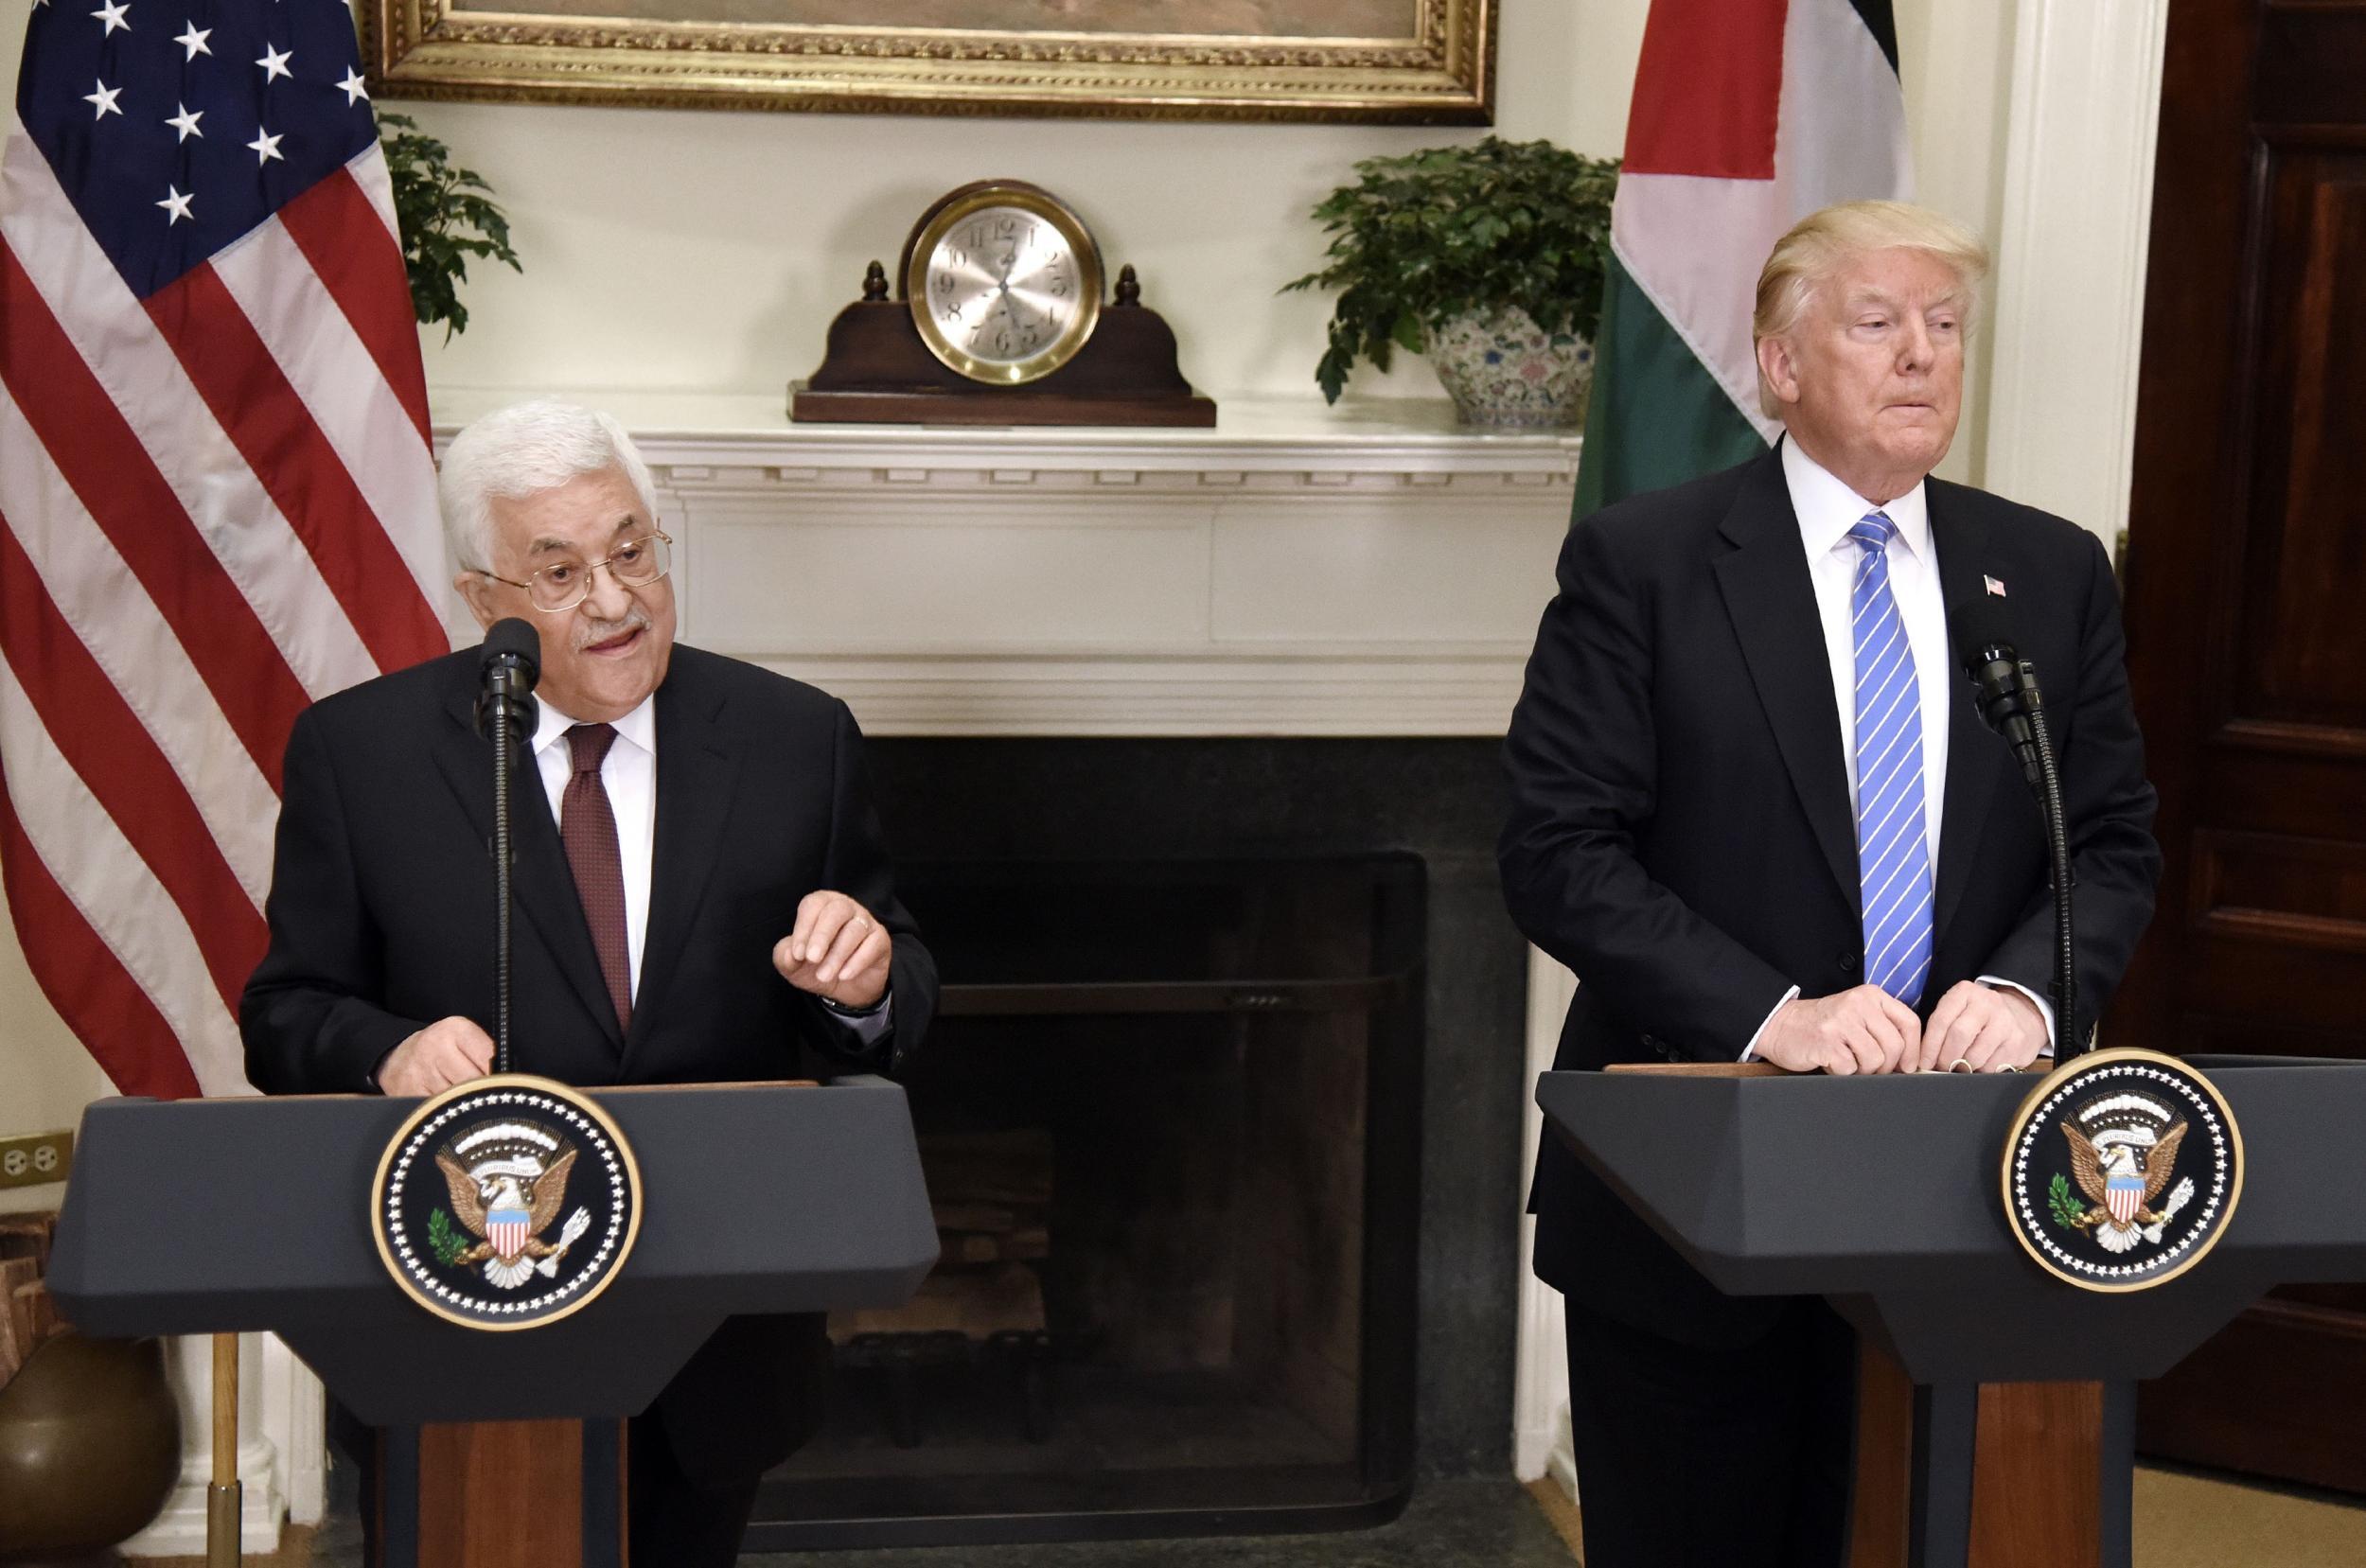 Donald Trump deleted a tweet about his meeting with Palestinian Authority Leader Mahmoud Abbas